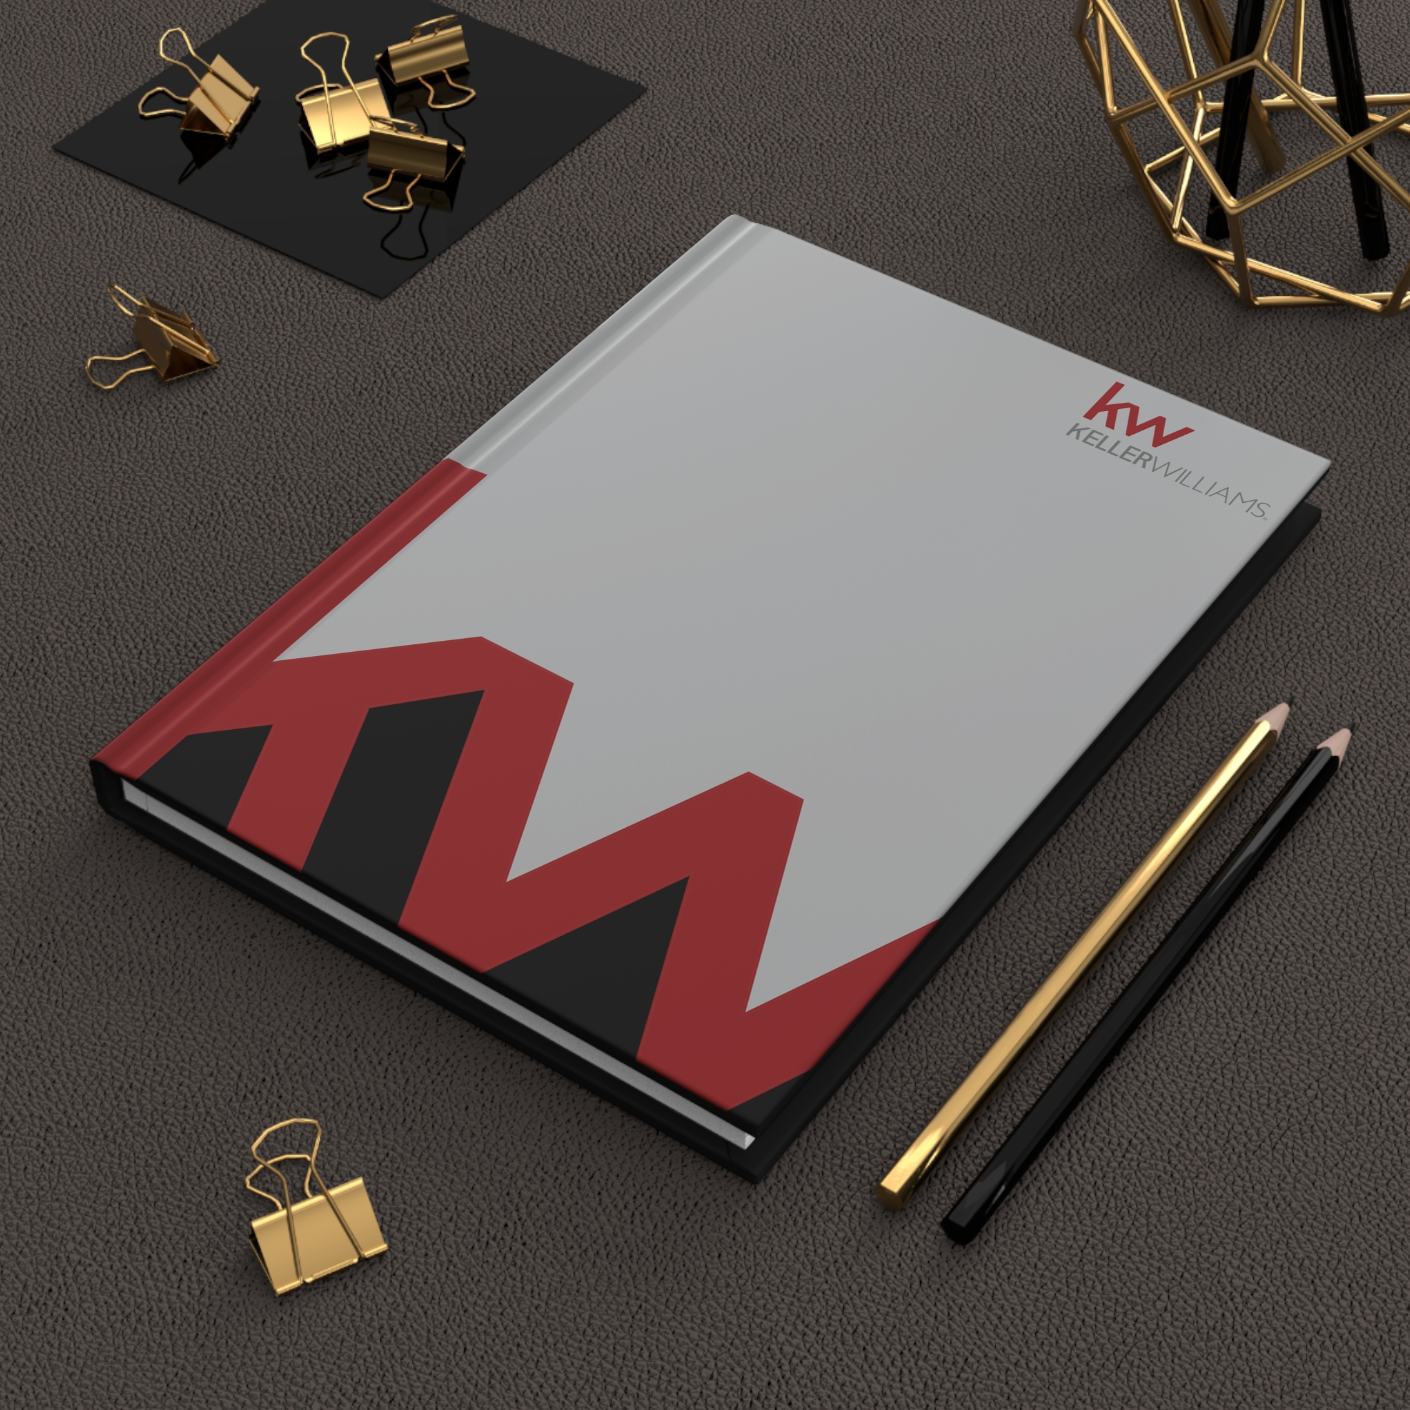 KW Full Color Hardcover Binders White KW Monogram (from as low as $10.46 per cover)